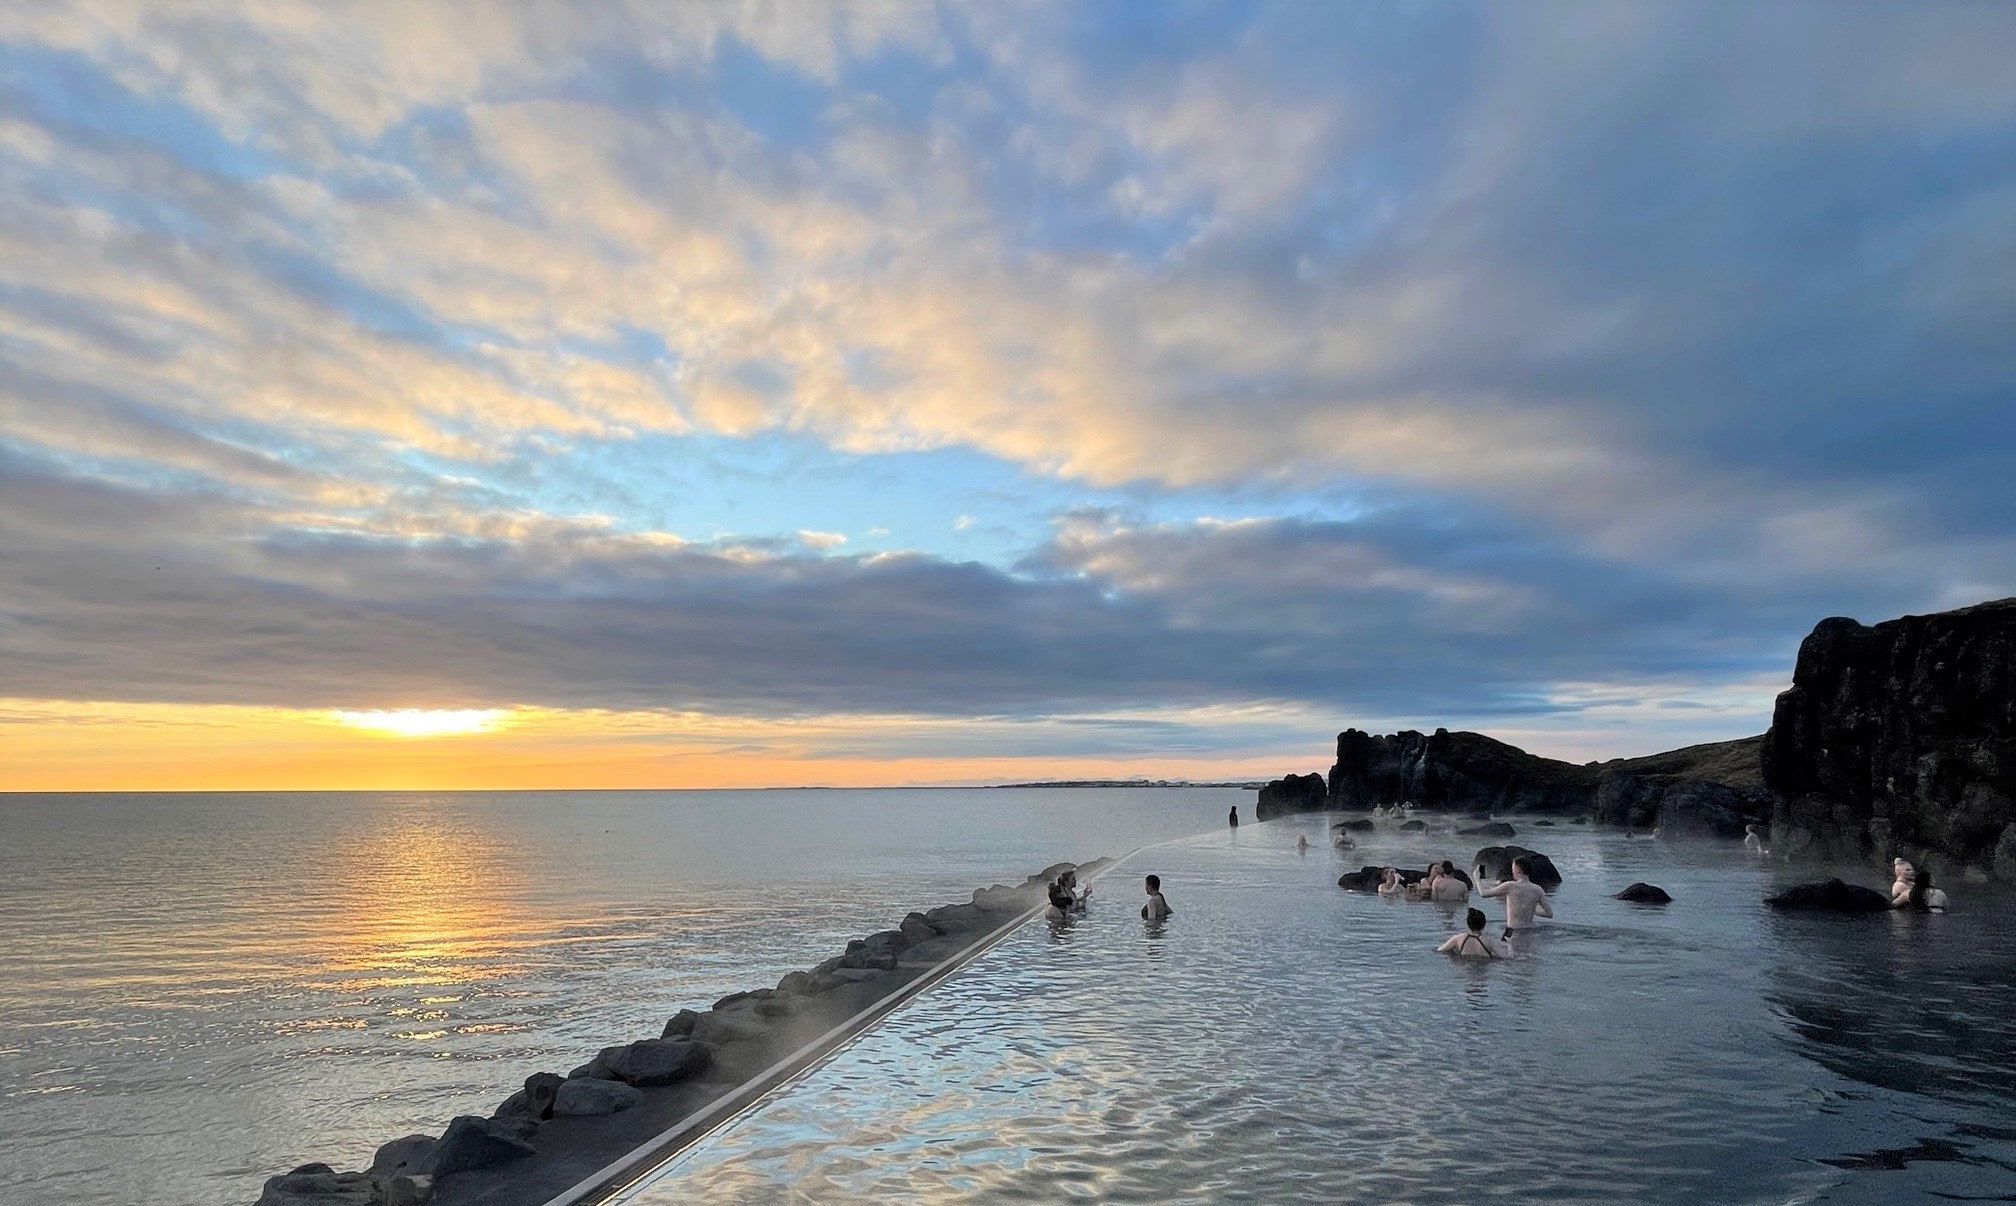 Swimmers at sunset in the infinity-edge pool of the Sky Lagoon